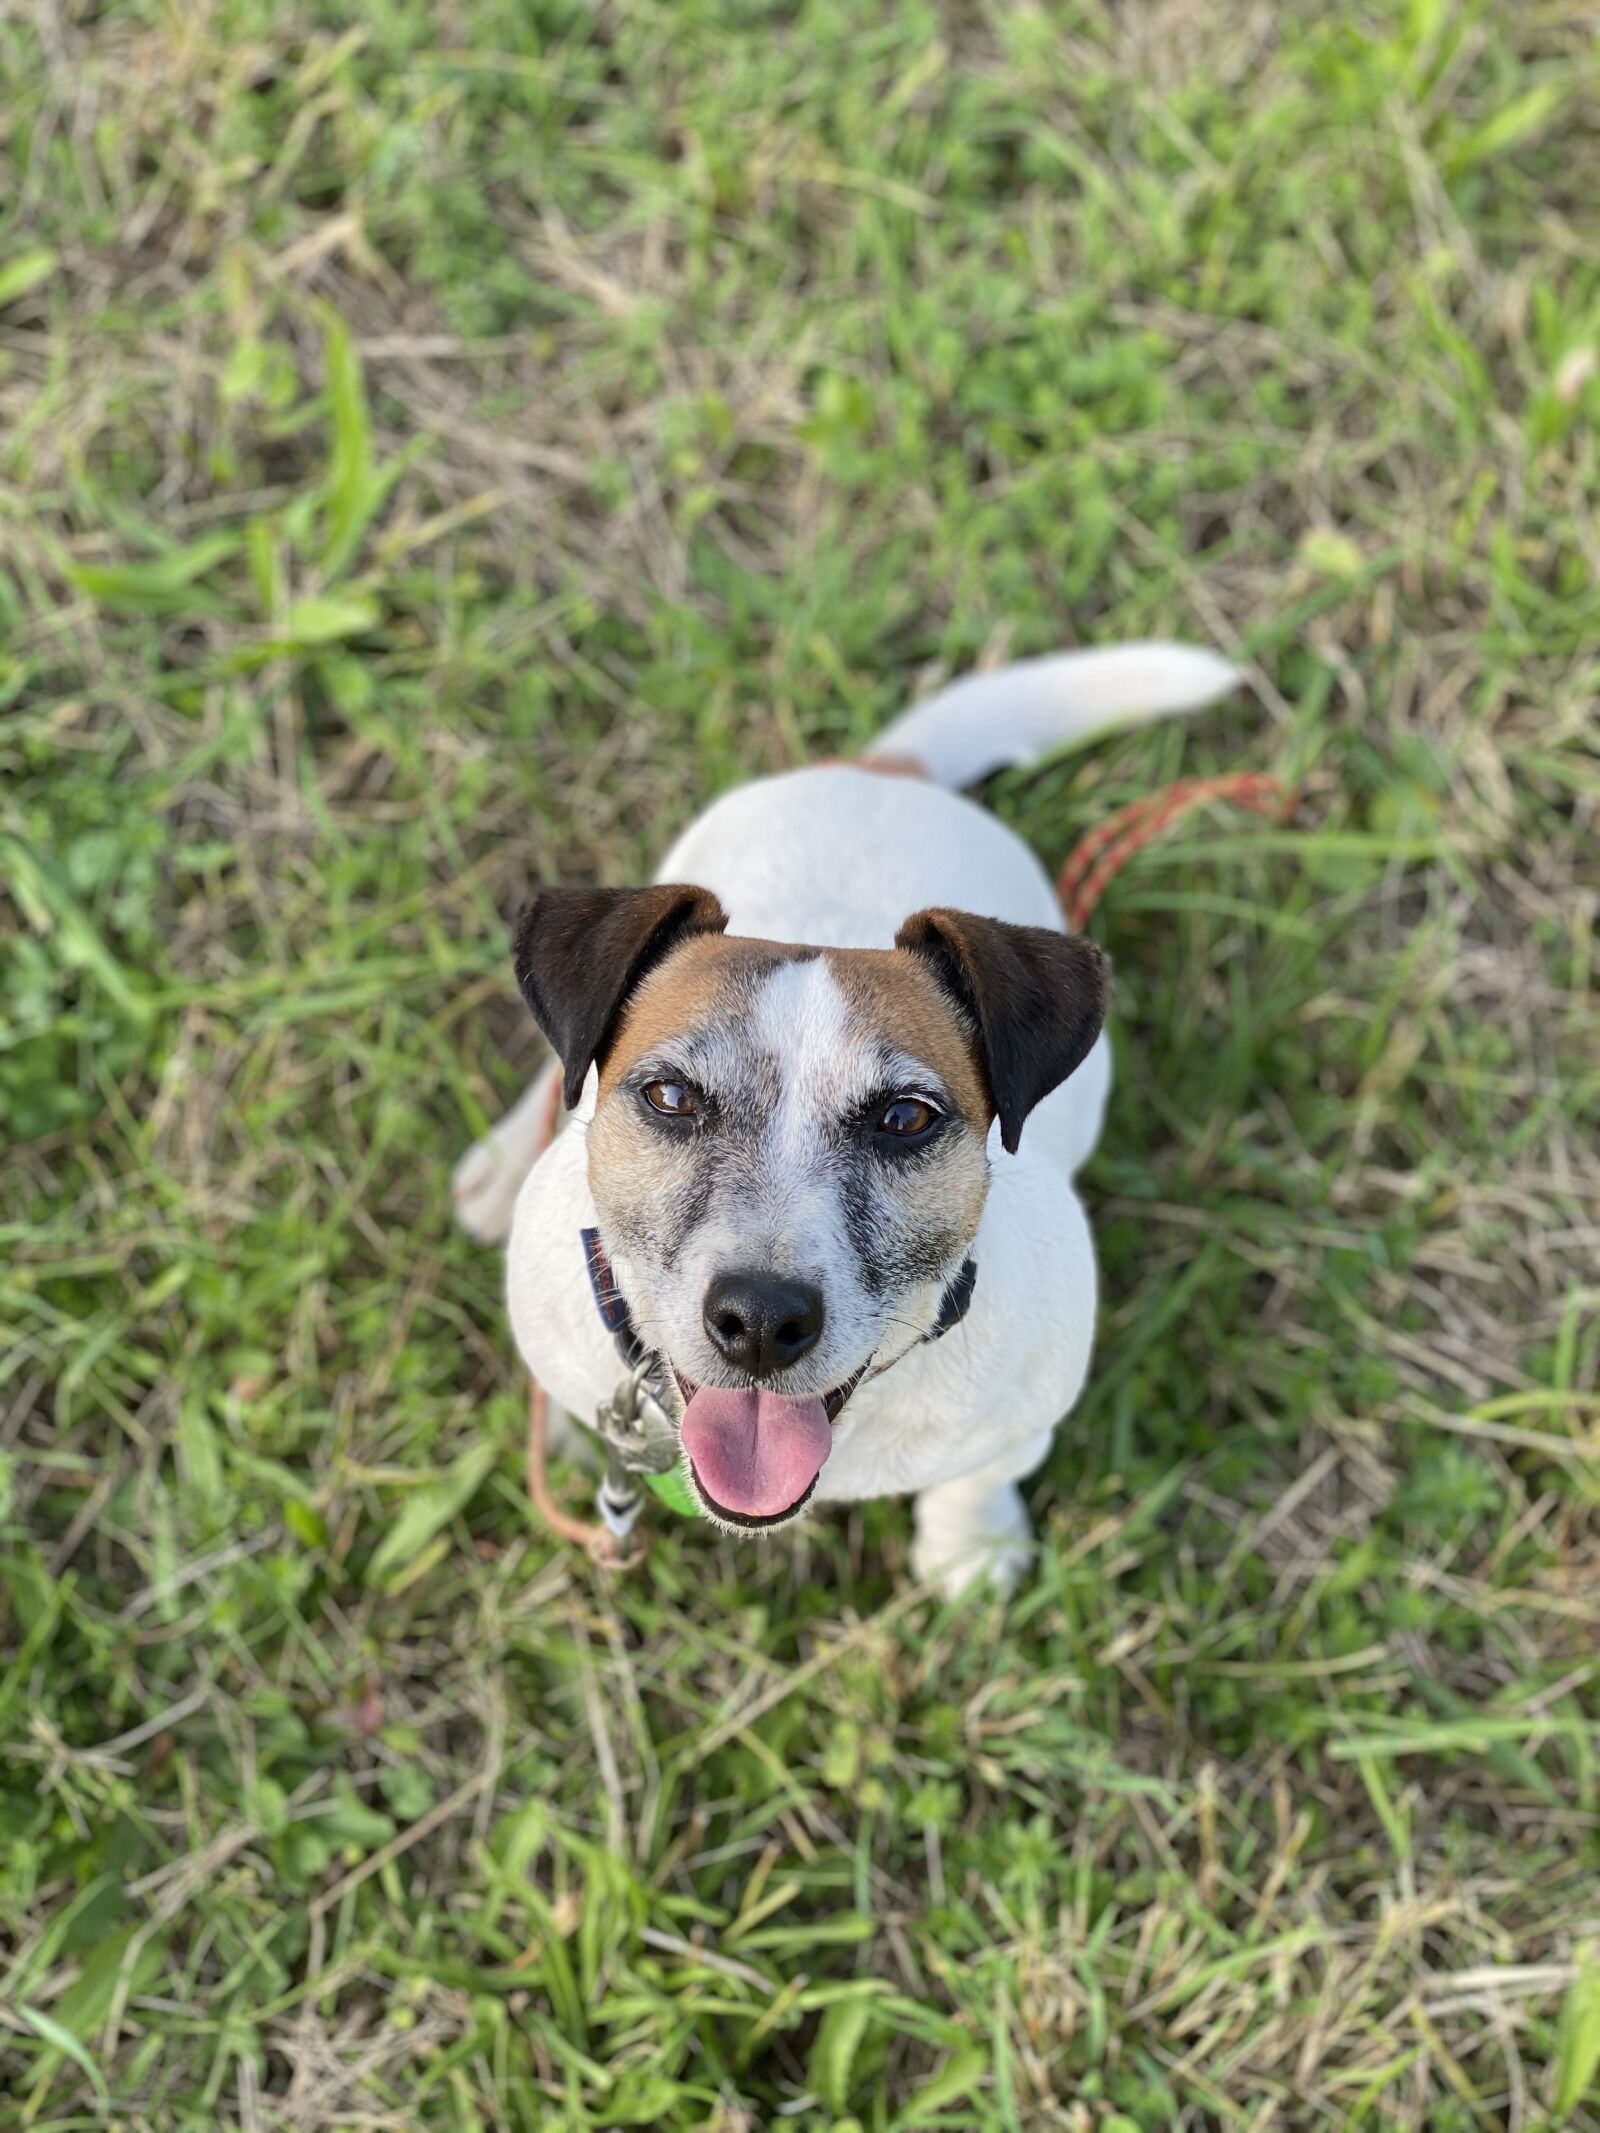 Apple iPhone 11 Pro + iPhone 11 Pro back dual camera 6mm f/2 sample photo. Jack russel, dog, terrier photography